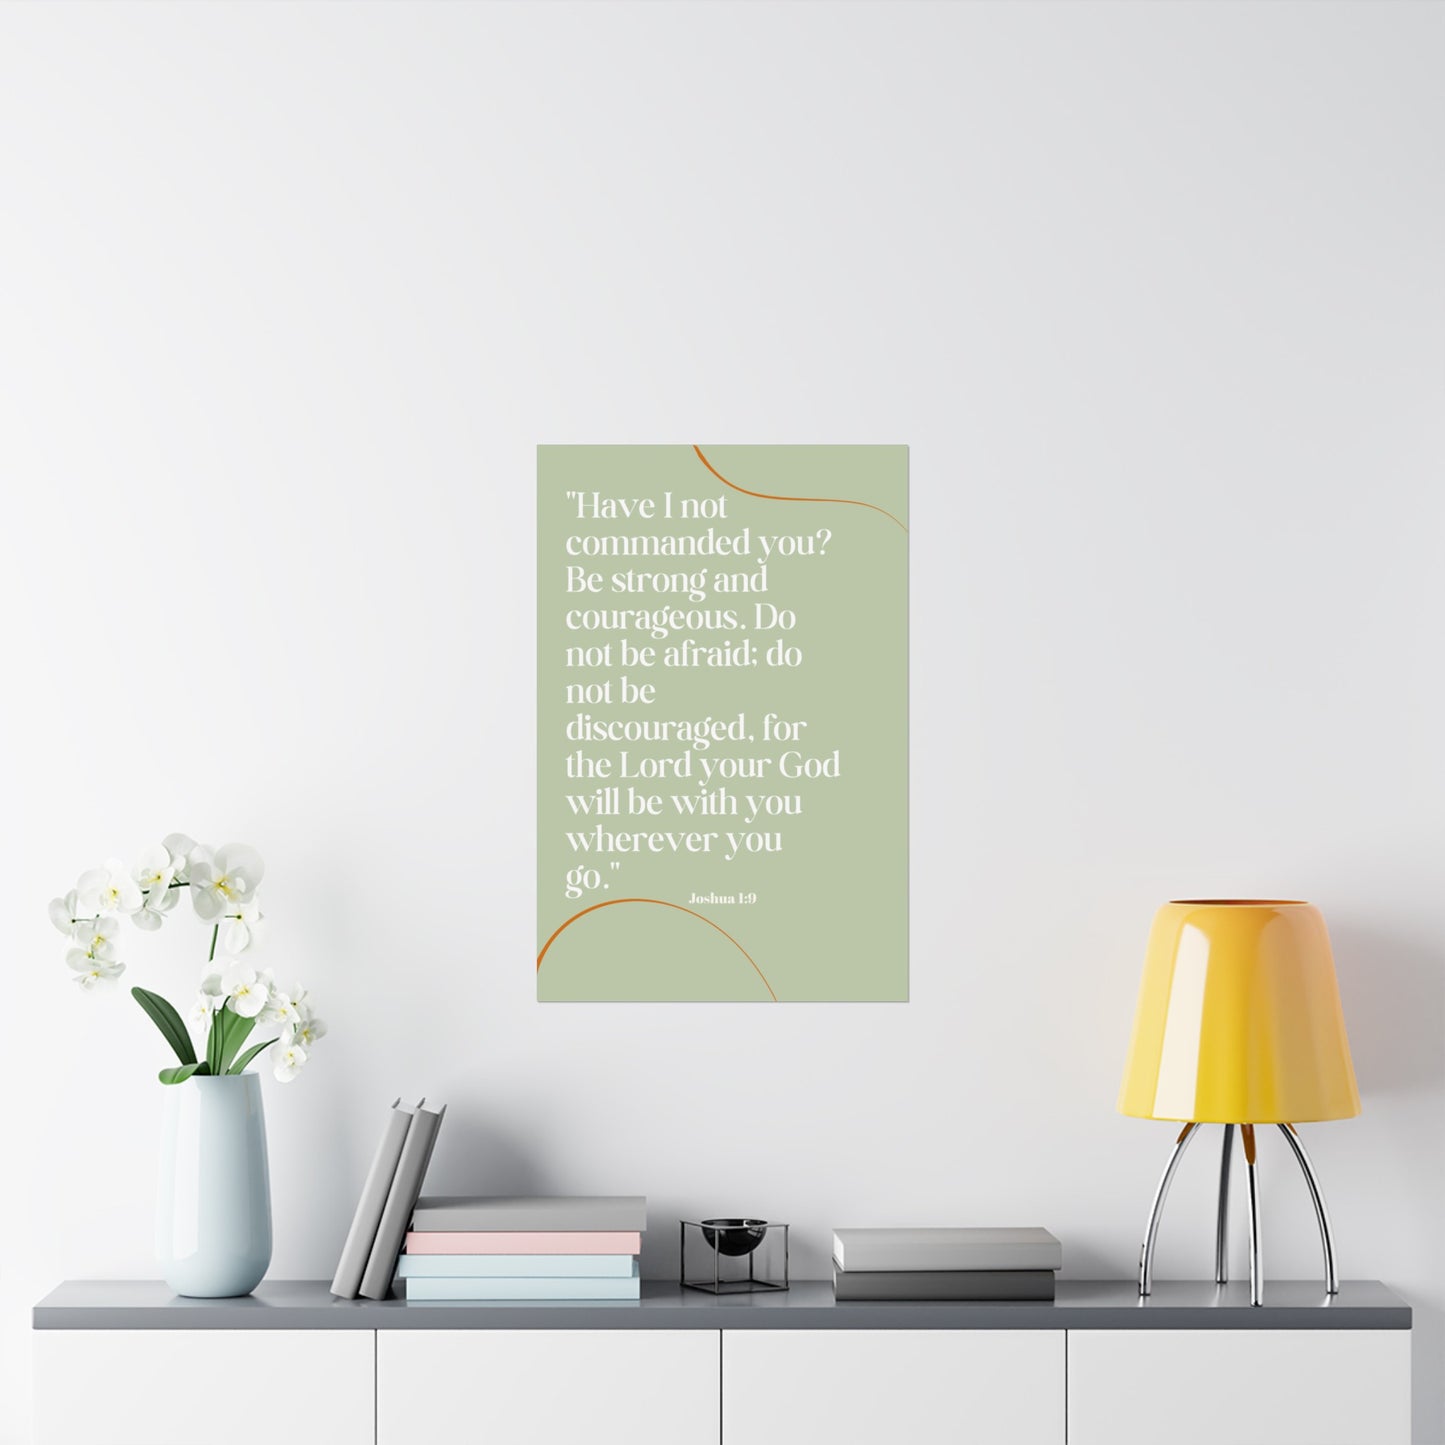 Premium Christian Poster: "Be Strong and Courageous" - Archival Paper | Assembled in the USA,Assembled in USA,Back to School,Home & Living,Indoor,Made in the USA,Made in USA,Matte,Paper,Posters,Valentine's Day promotion